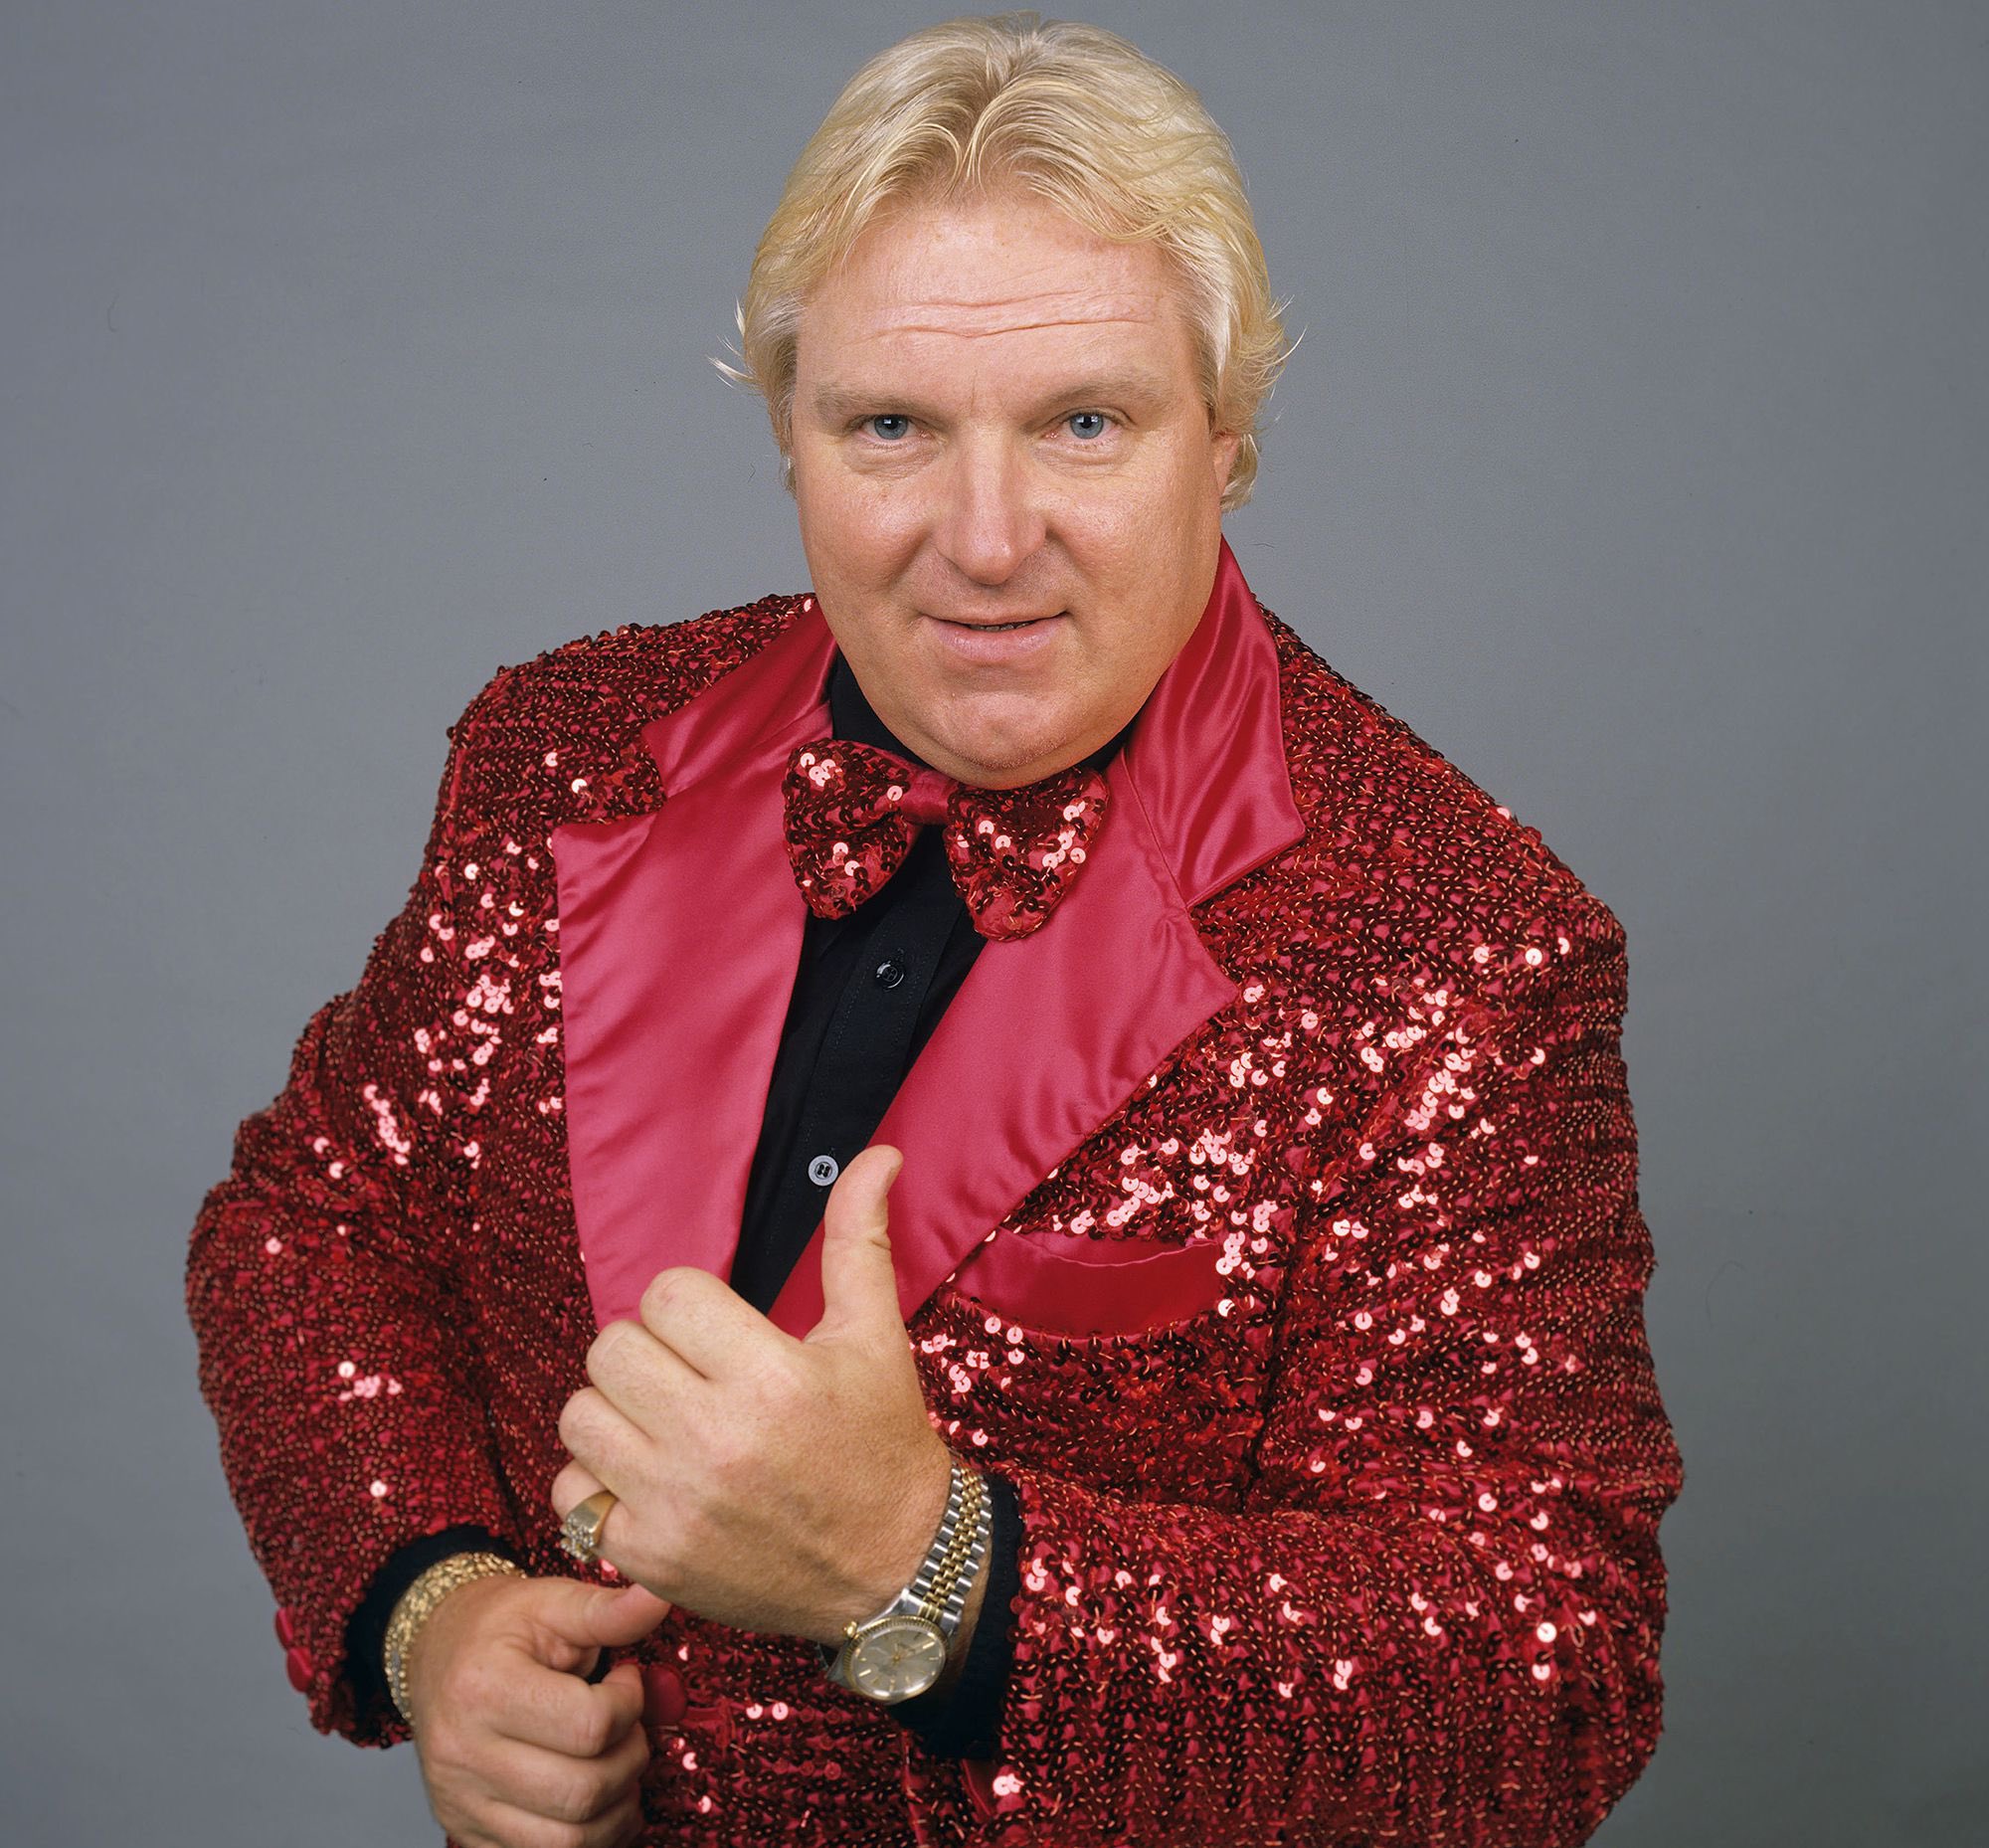 He would have the podcast in the world if he was alive today. Happy Birthday to the late great Bobby Heenan! 